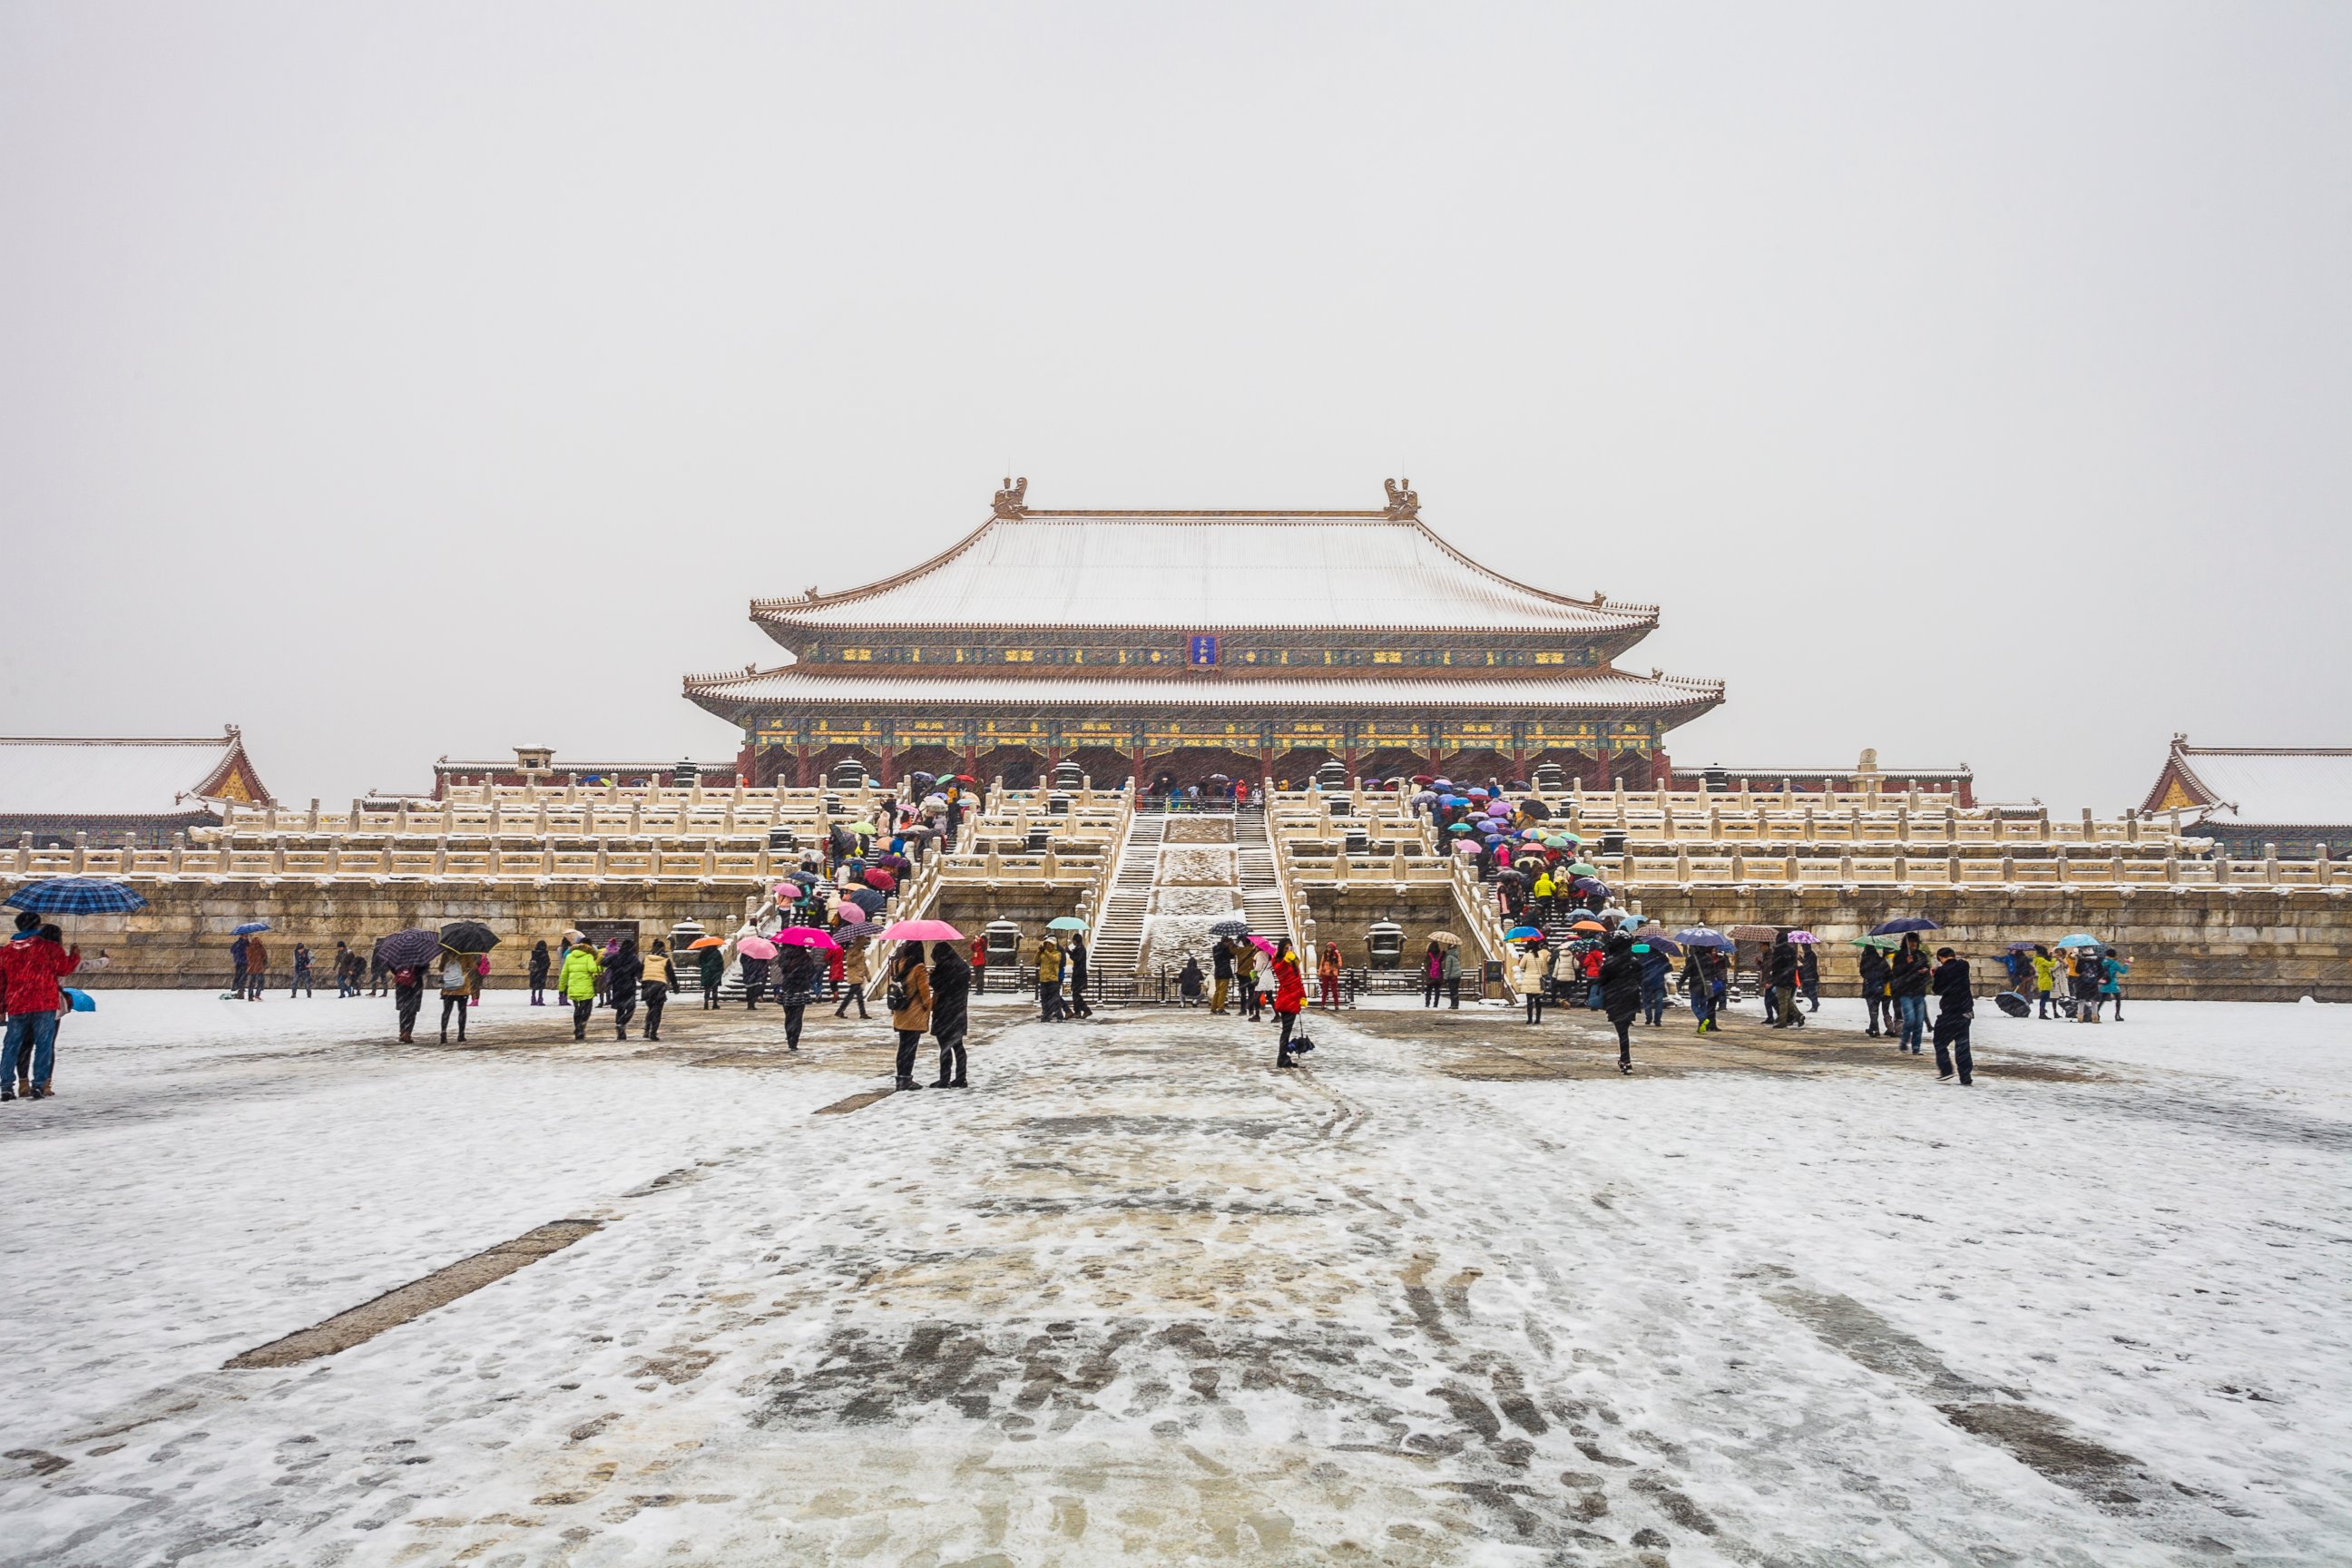 PHOTO: View of the Palace Museum, also known as the Forbidden City, in the snow in Beijing on Nov. 22, 2015.